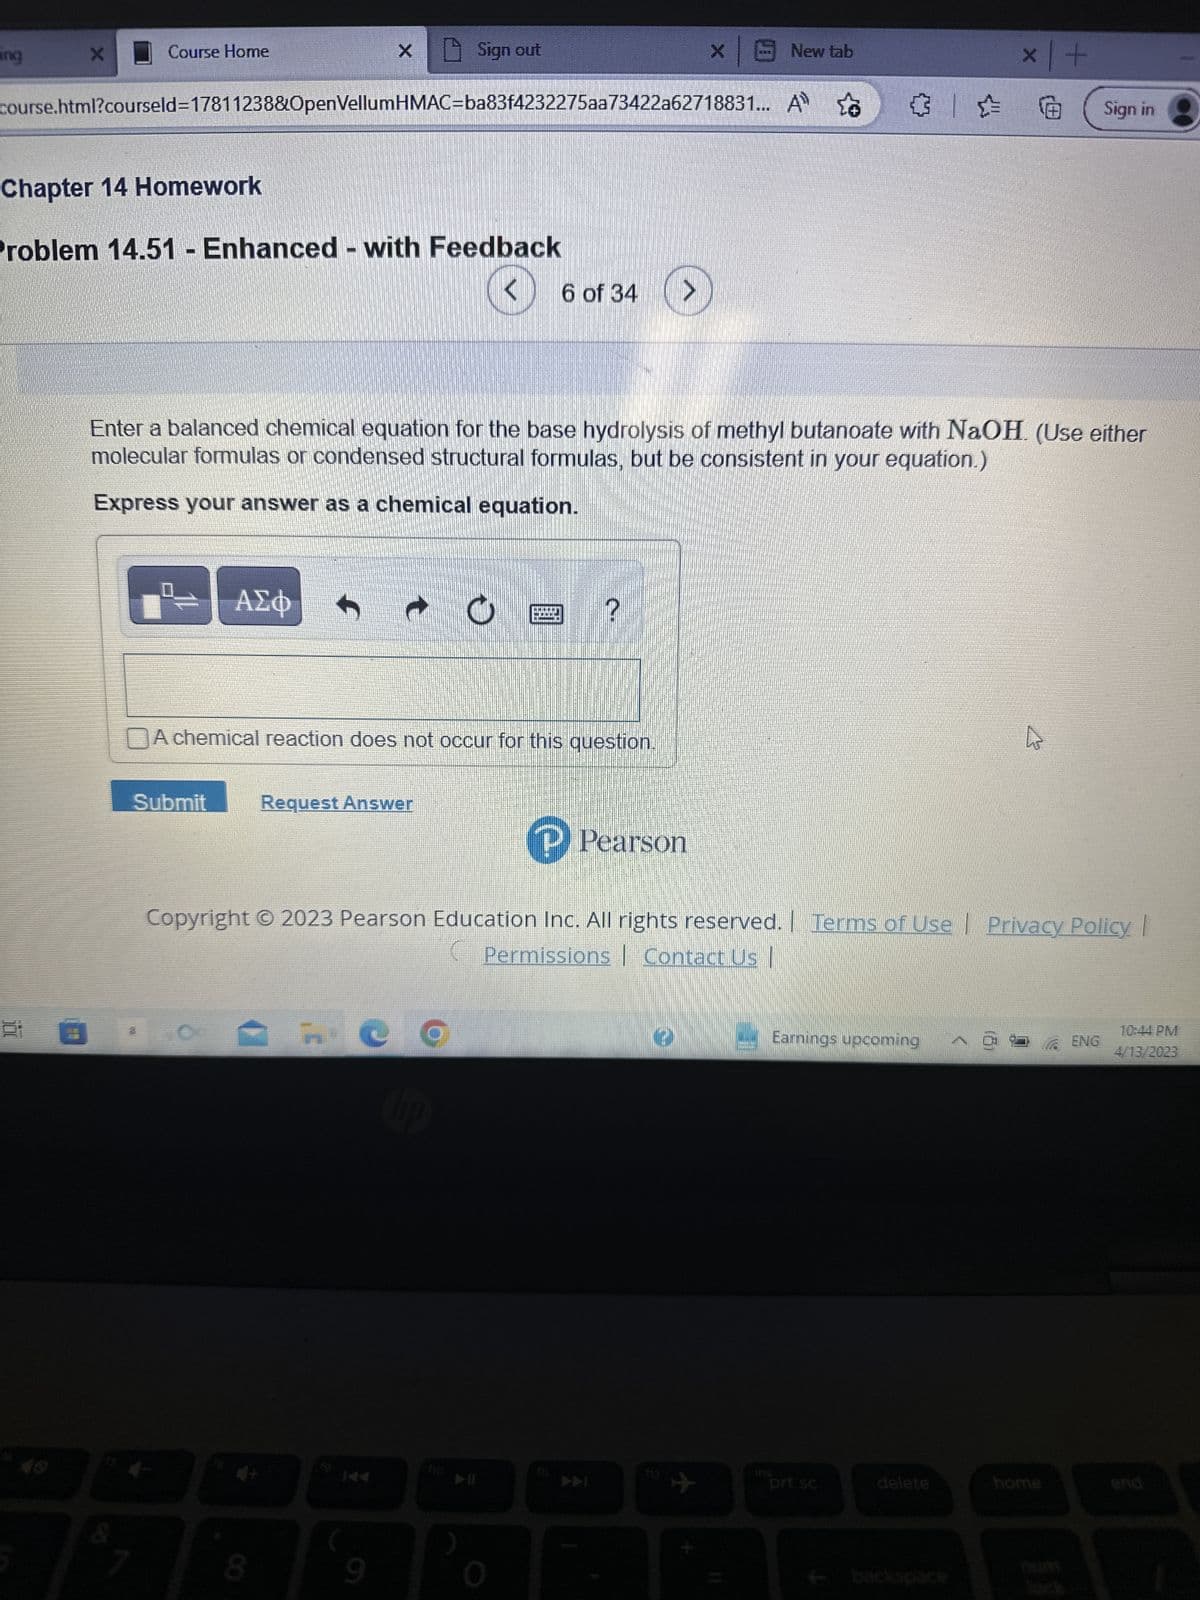 ang
X
Course Home
Chapter 14 Homework
Problem 14.51 - Enhanced - with Feedback
course.html?courseld=17811238&OpenVellumHMAC=ba83f4232275aa73422a62718831... A
Submit
7
ΑΣΦ
t
Request Answer
Sign out
Enter a balanced chemical equation for the base hydrolysis of methyl butanoate with NaOH. (Use either
molecular formulas or condensed structural formulas, but be consistent in your equation.)
Express your answer as a chemical equation.
CO
bp
9
DA chemical reaction does not occur for this question.
O
ho
6 of 34
▶I
會
E ?
DOODLE
× |
www.
P Pearson
New tab
Copyright © 2023 Pearson Education Inc. All rights reserved. | Terms of Use Privacy Policy |
Permissions | Contact Us |
ins
६३ | =
Earnings upcoming @
prt sc
x+
delete
Sign in
home
ENG
10:44 PM
4/13/2023